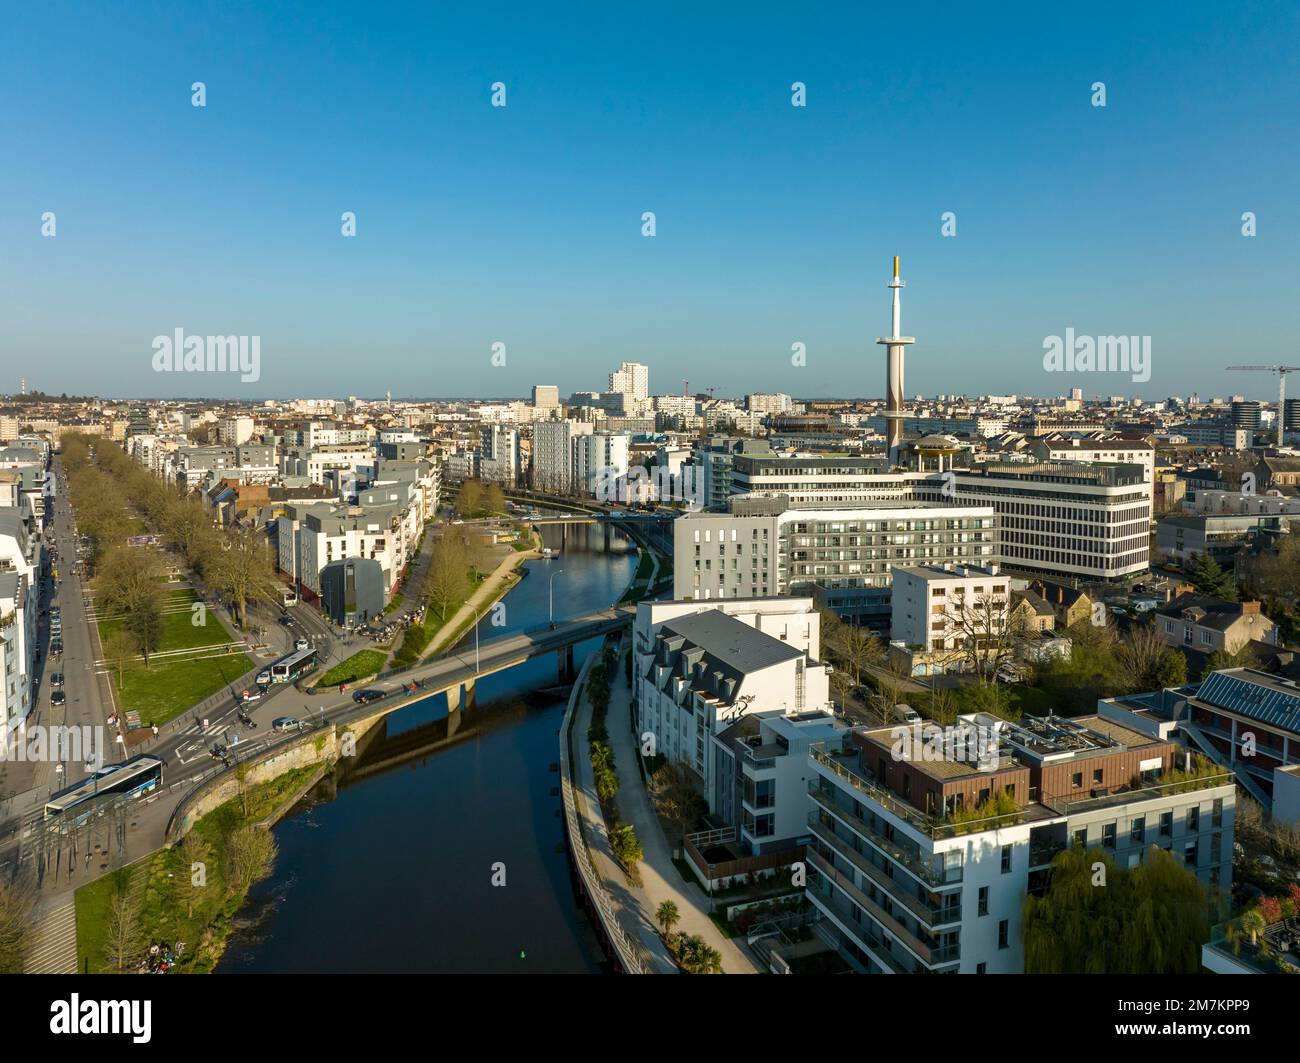 Rennes (Brittany, north-western France): aerial view of the River Vilaine, the avenue “mail Francois Mitterrand” and the tower block “tour Mabilais” i Stock Photo